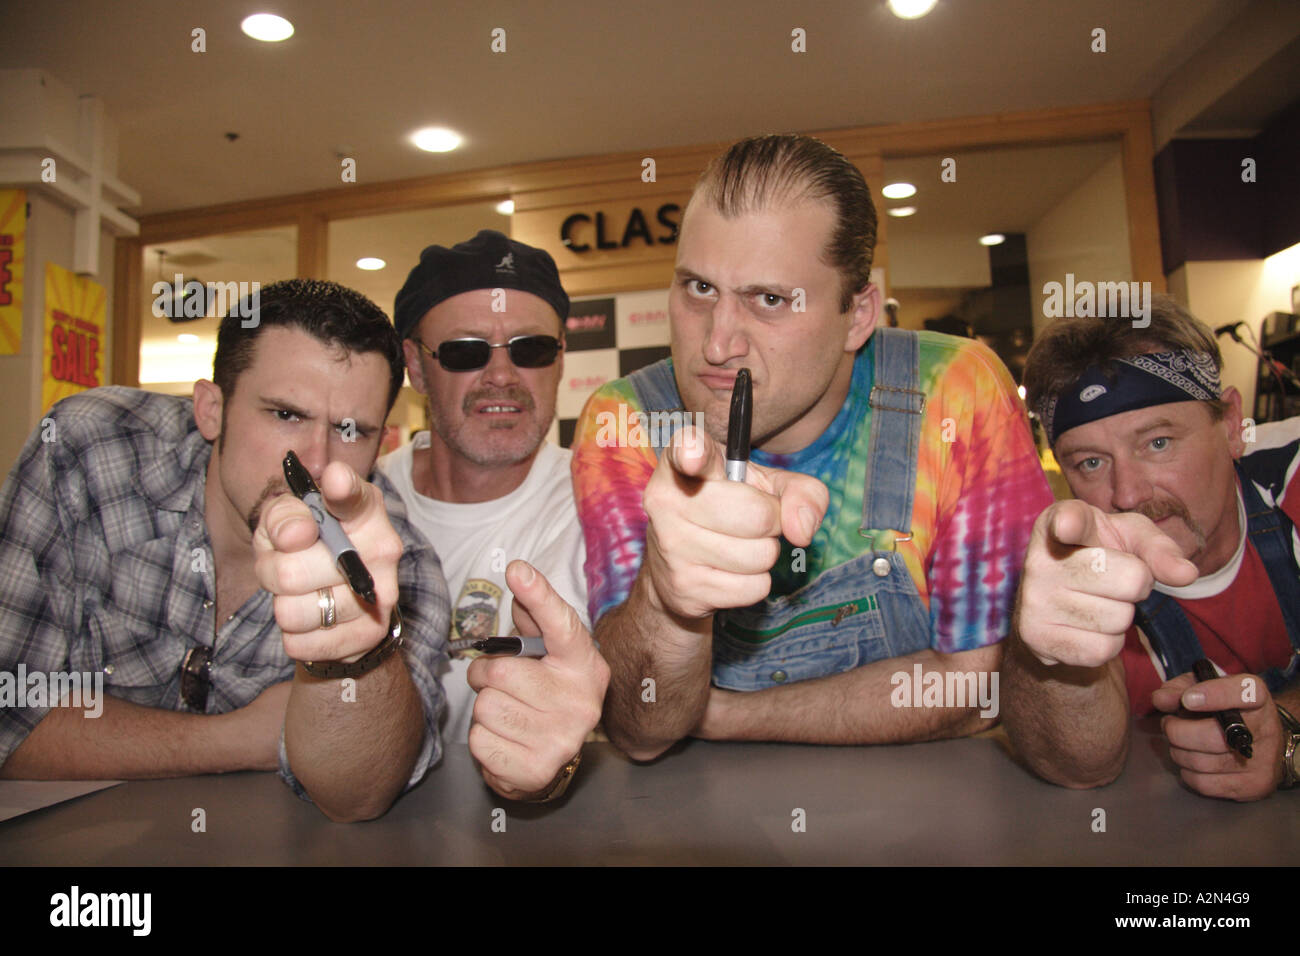 Members of Rockgrass band Hayseed Dixie sign autographs at HMV music store in London England Stock Photo